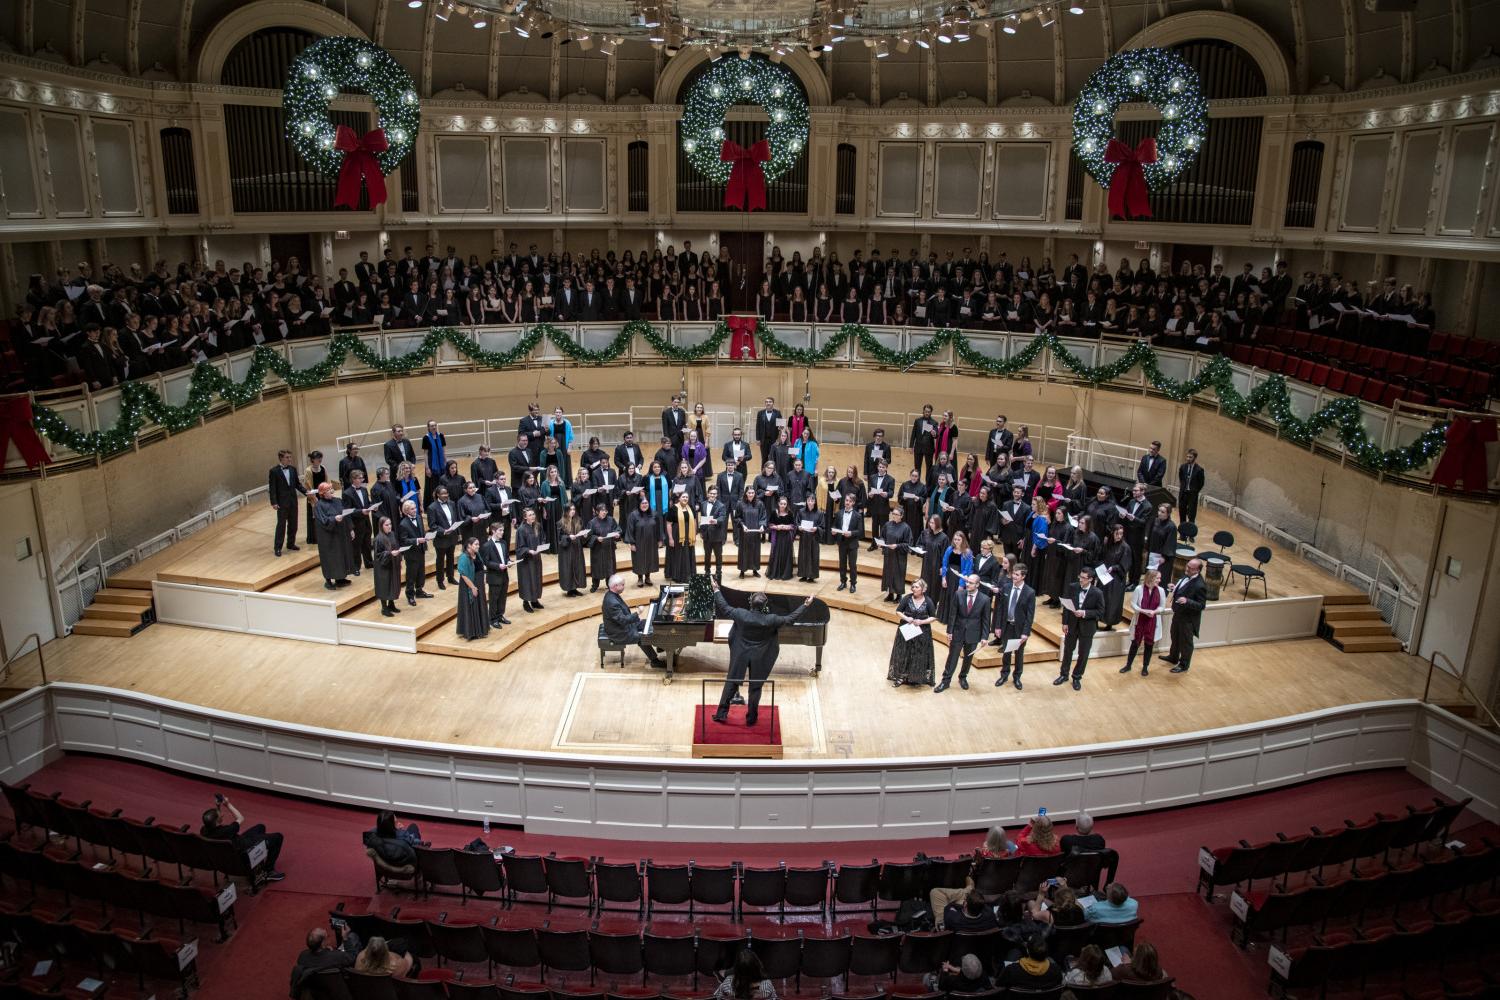 The <a href='http://kr.86899805.com'>bv伟德ios下载</a> Choir performs in the Chicago Symphony Hall.